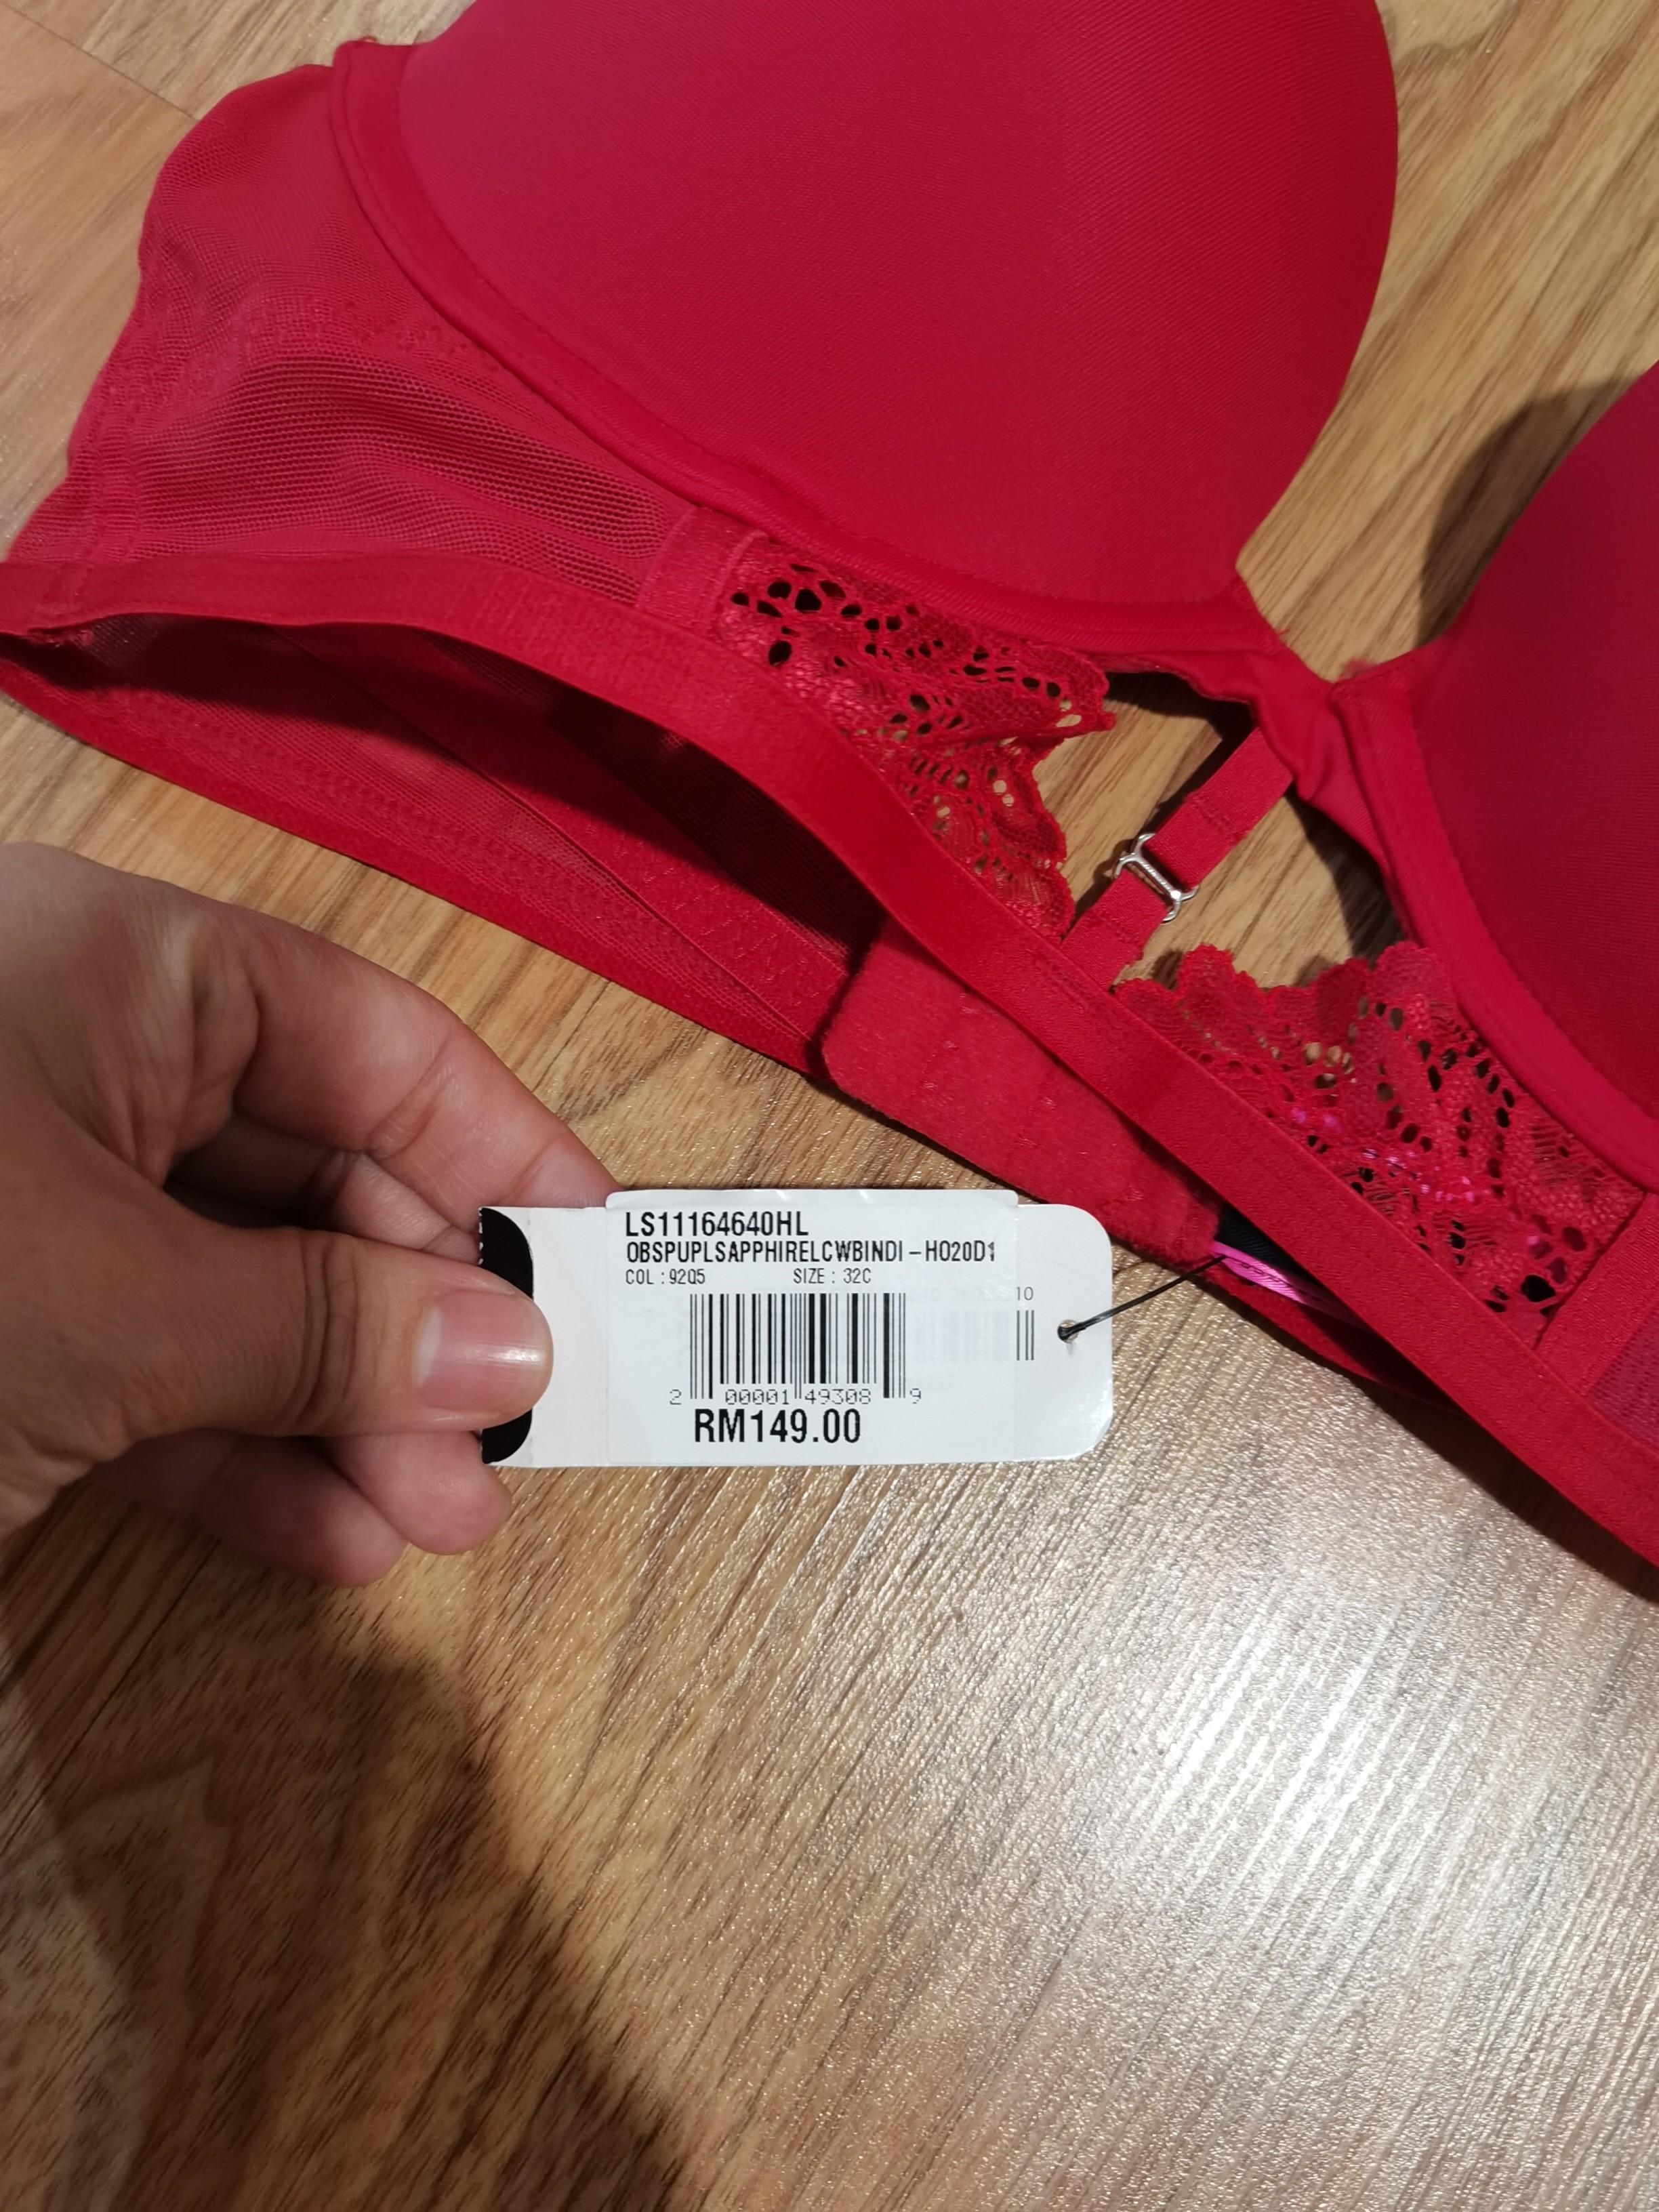 BN. La Senza Bra. Brand new with tag. Obsession. Red plunge. Underwear.  With straps. 34C. 34 C. Lingerie